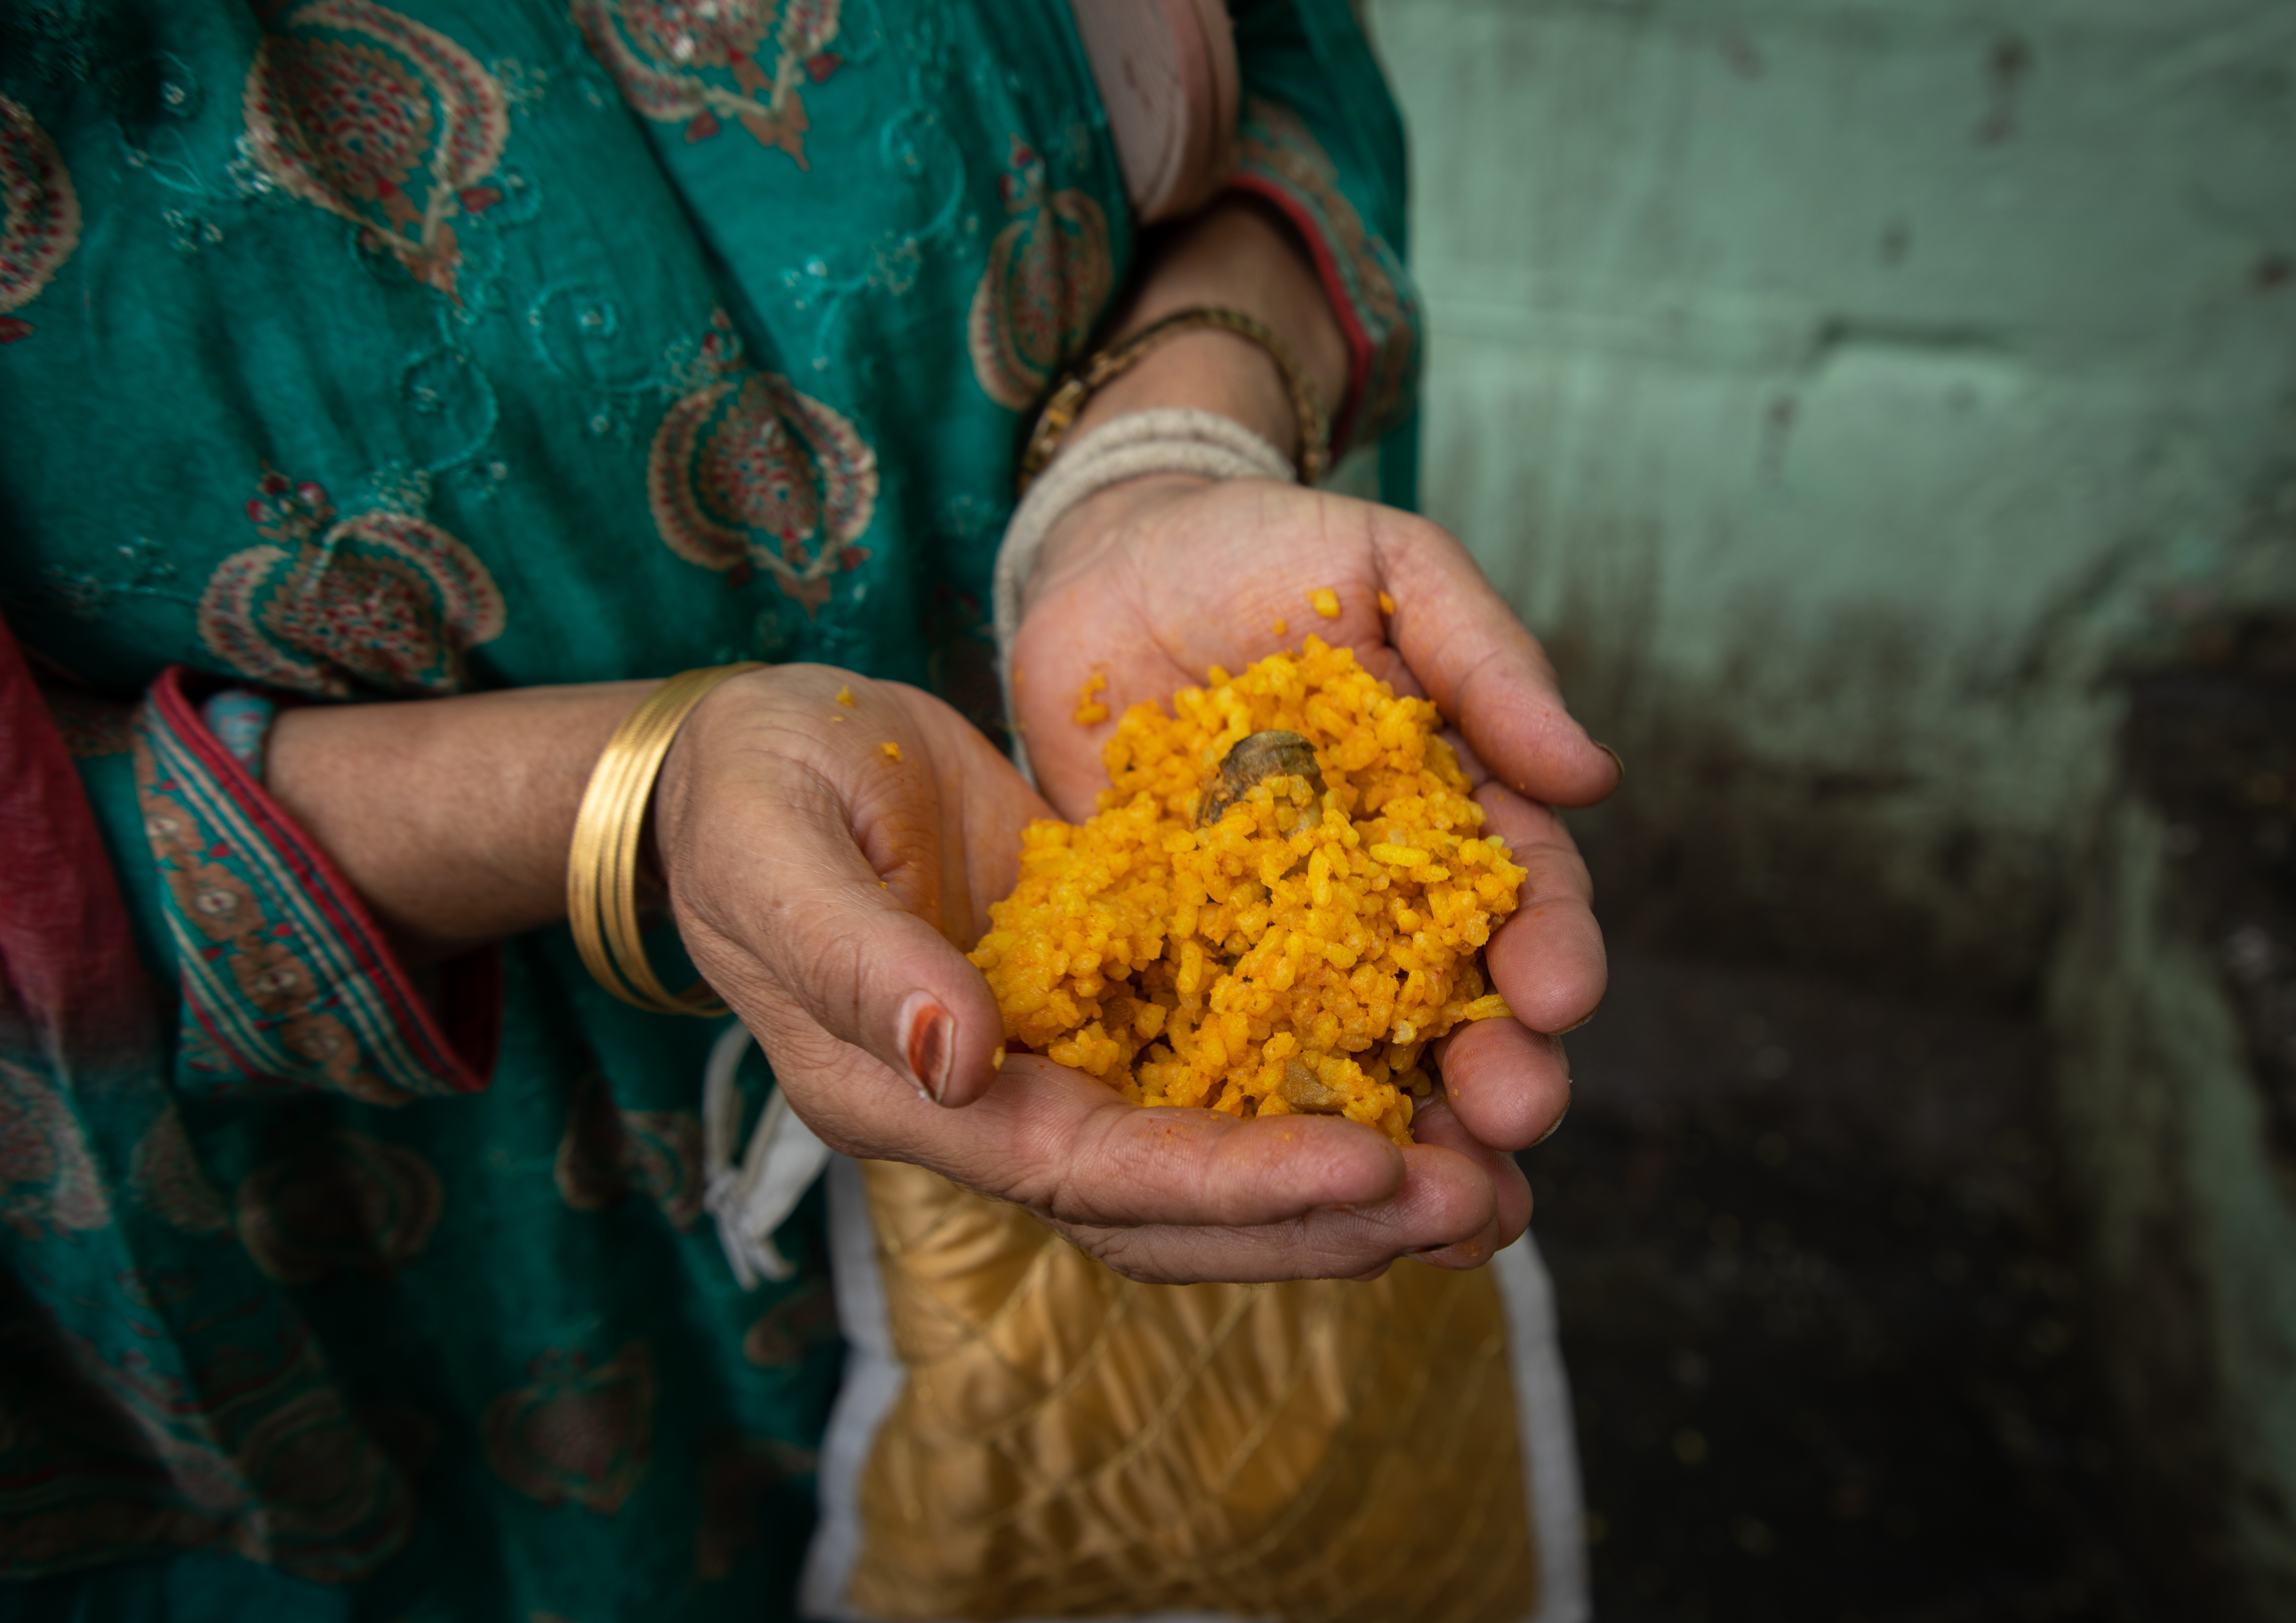 A Kashmiri woman's cupped hands holds a religious offering of saffron rice